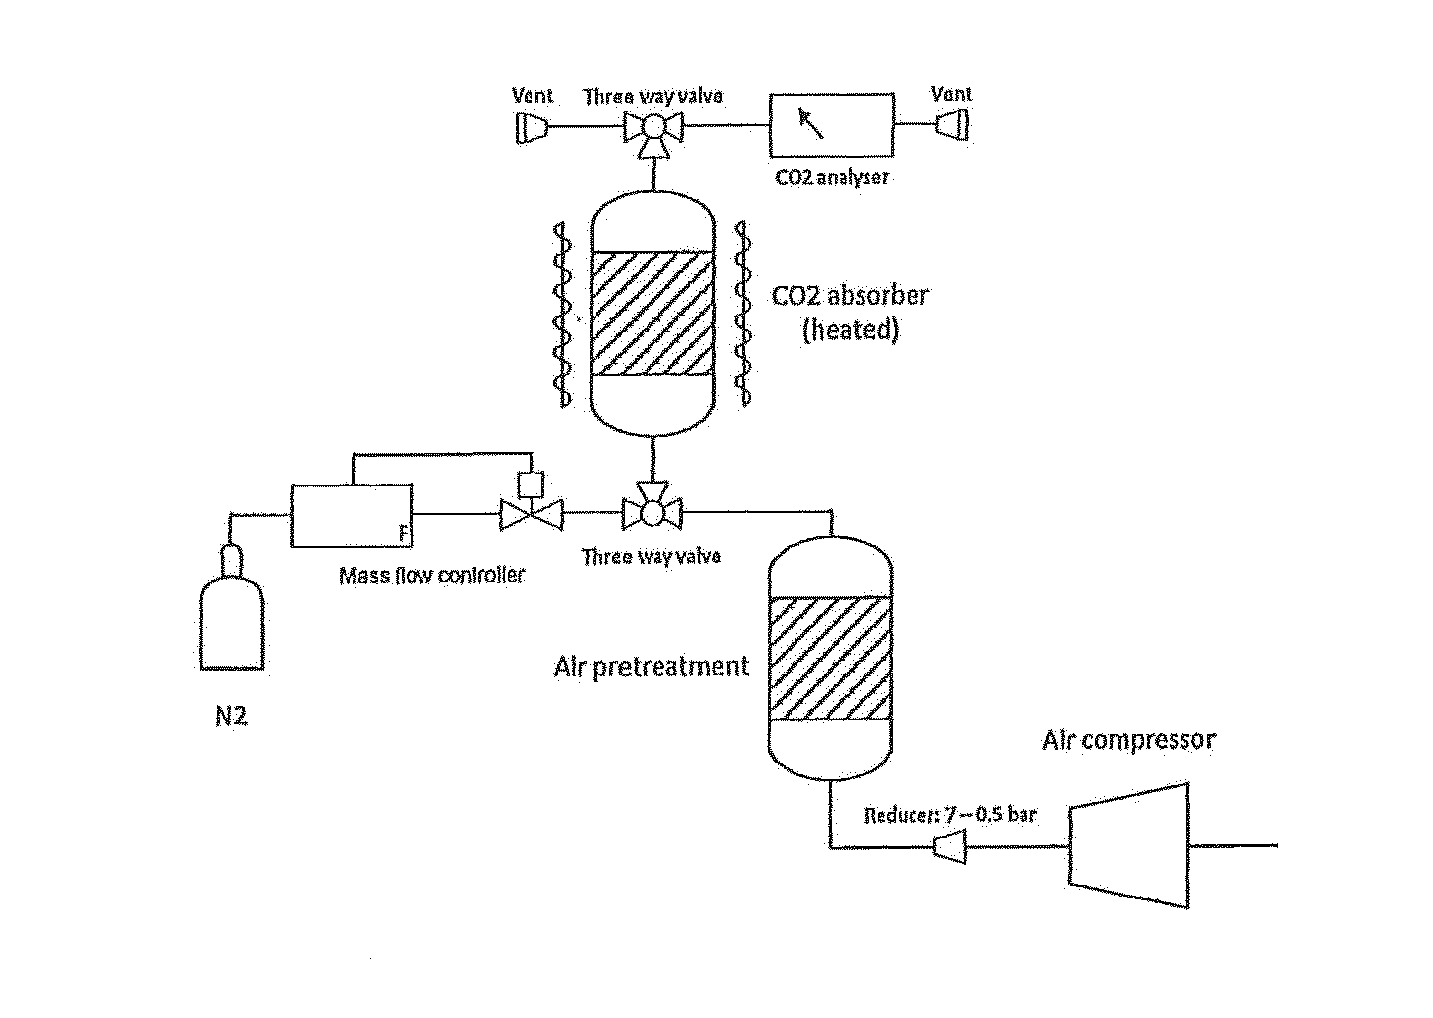 Materials and process for reversible adsorption of carbon dioxide